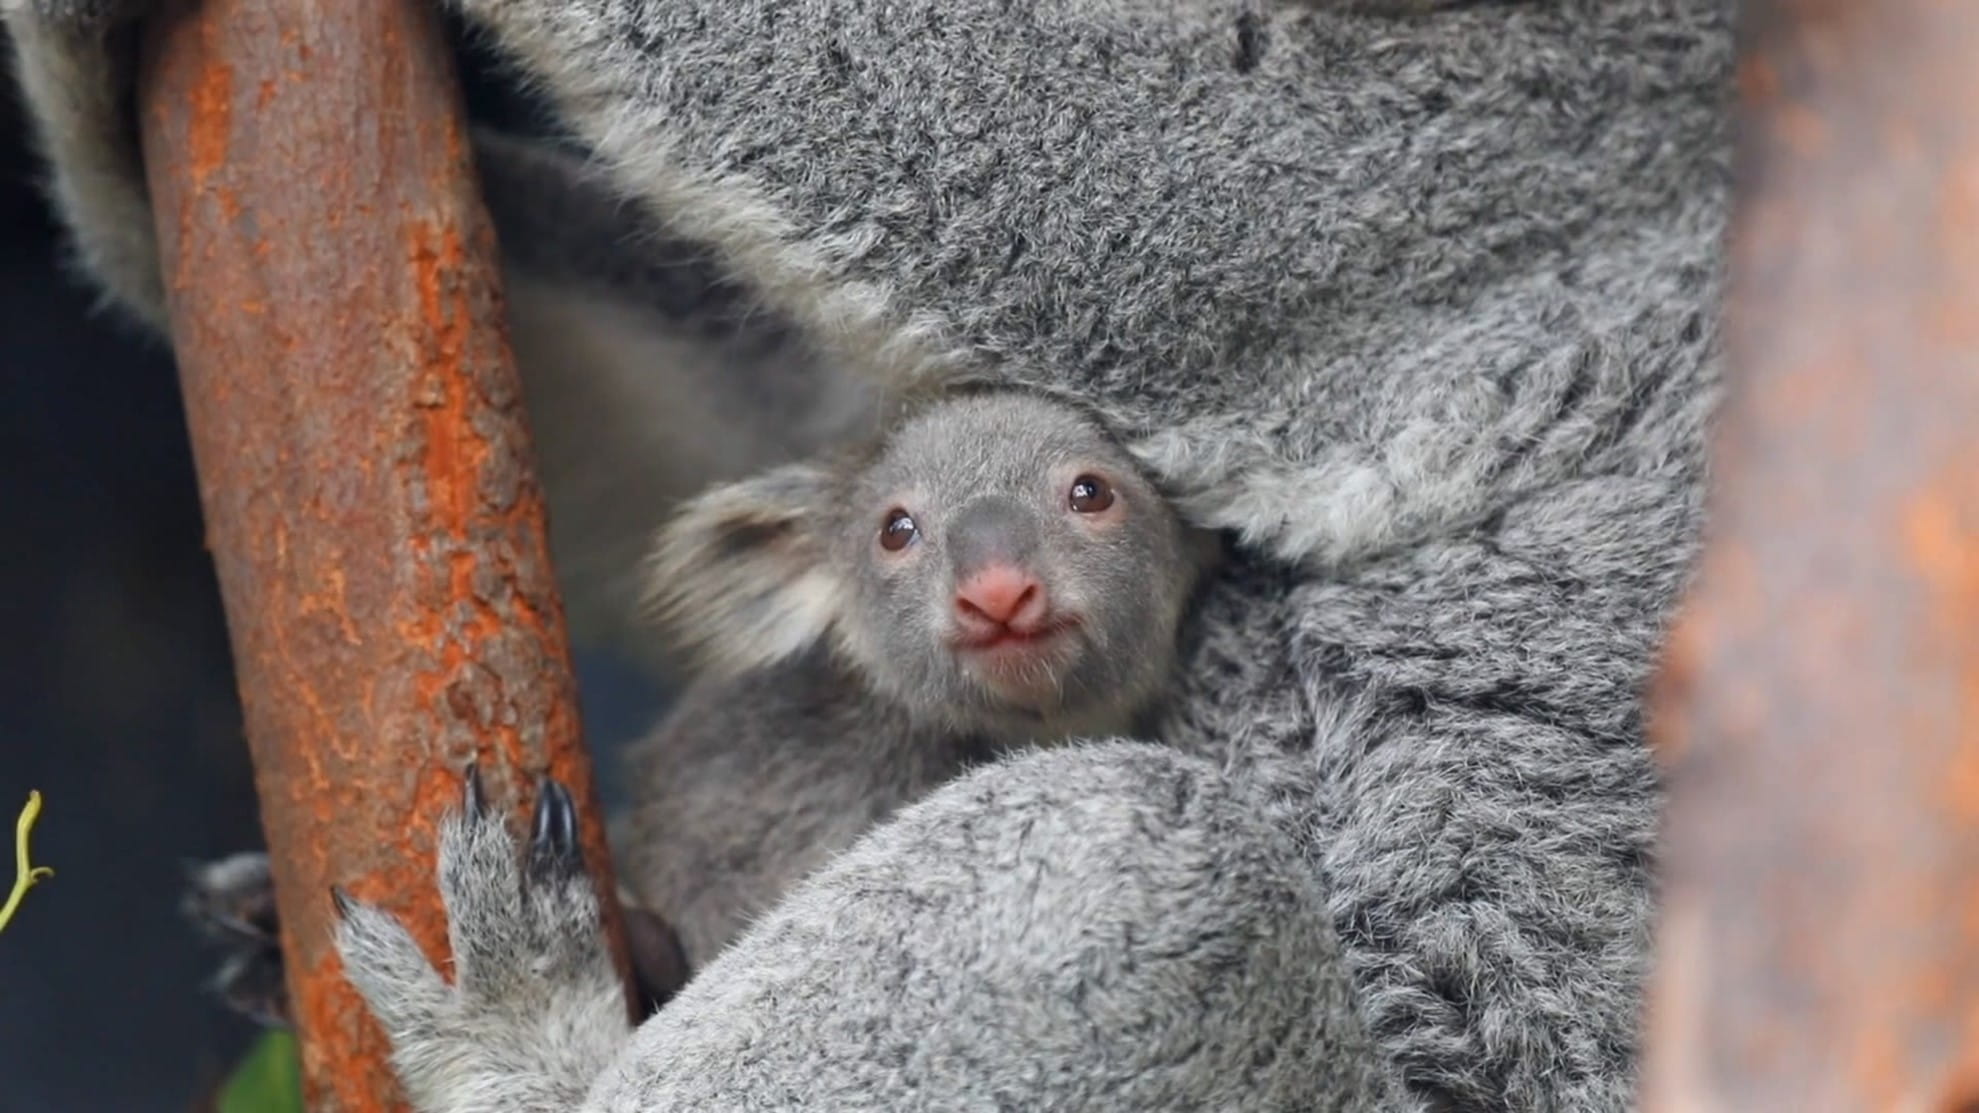 A cute baby joey koala looks out of its mothers pouch for the first time